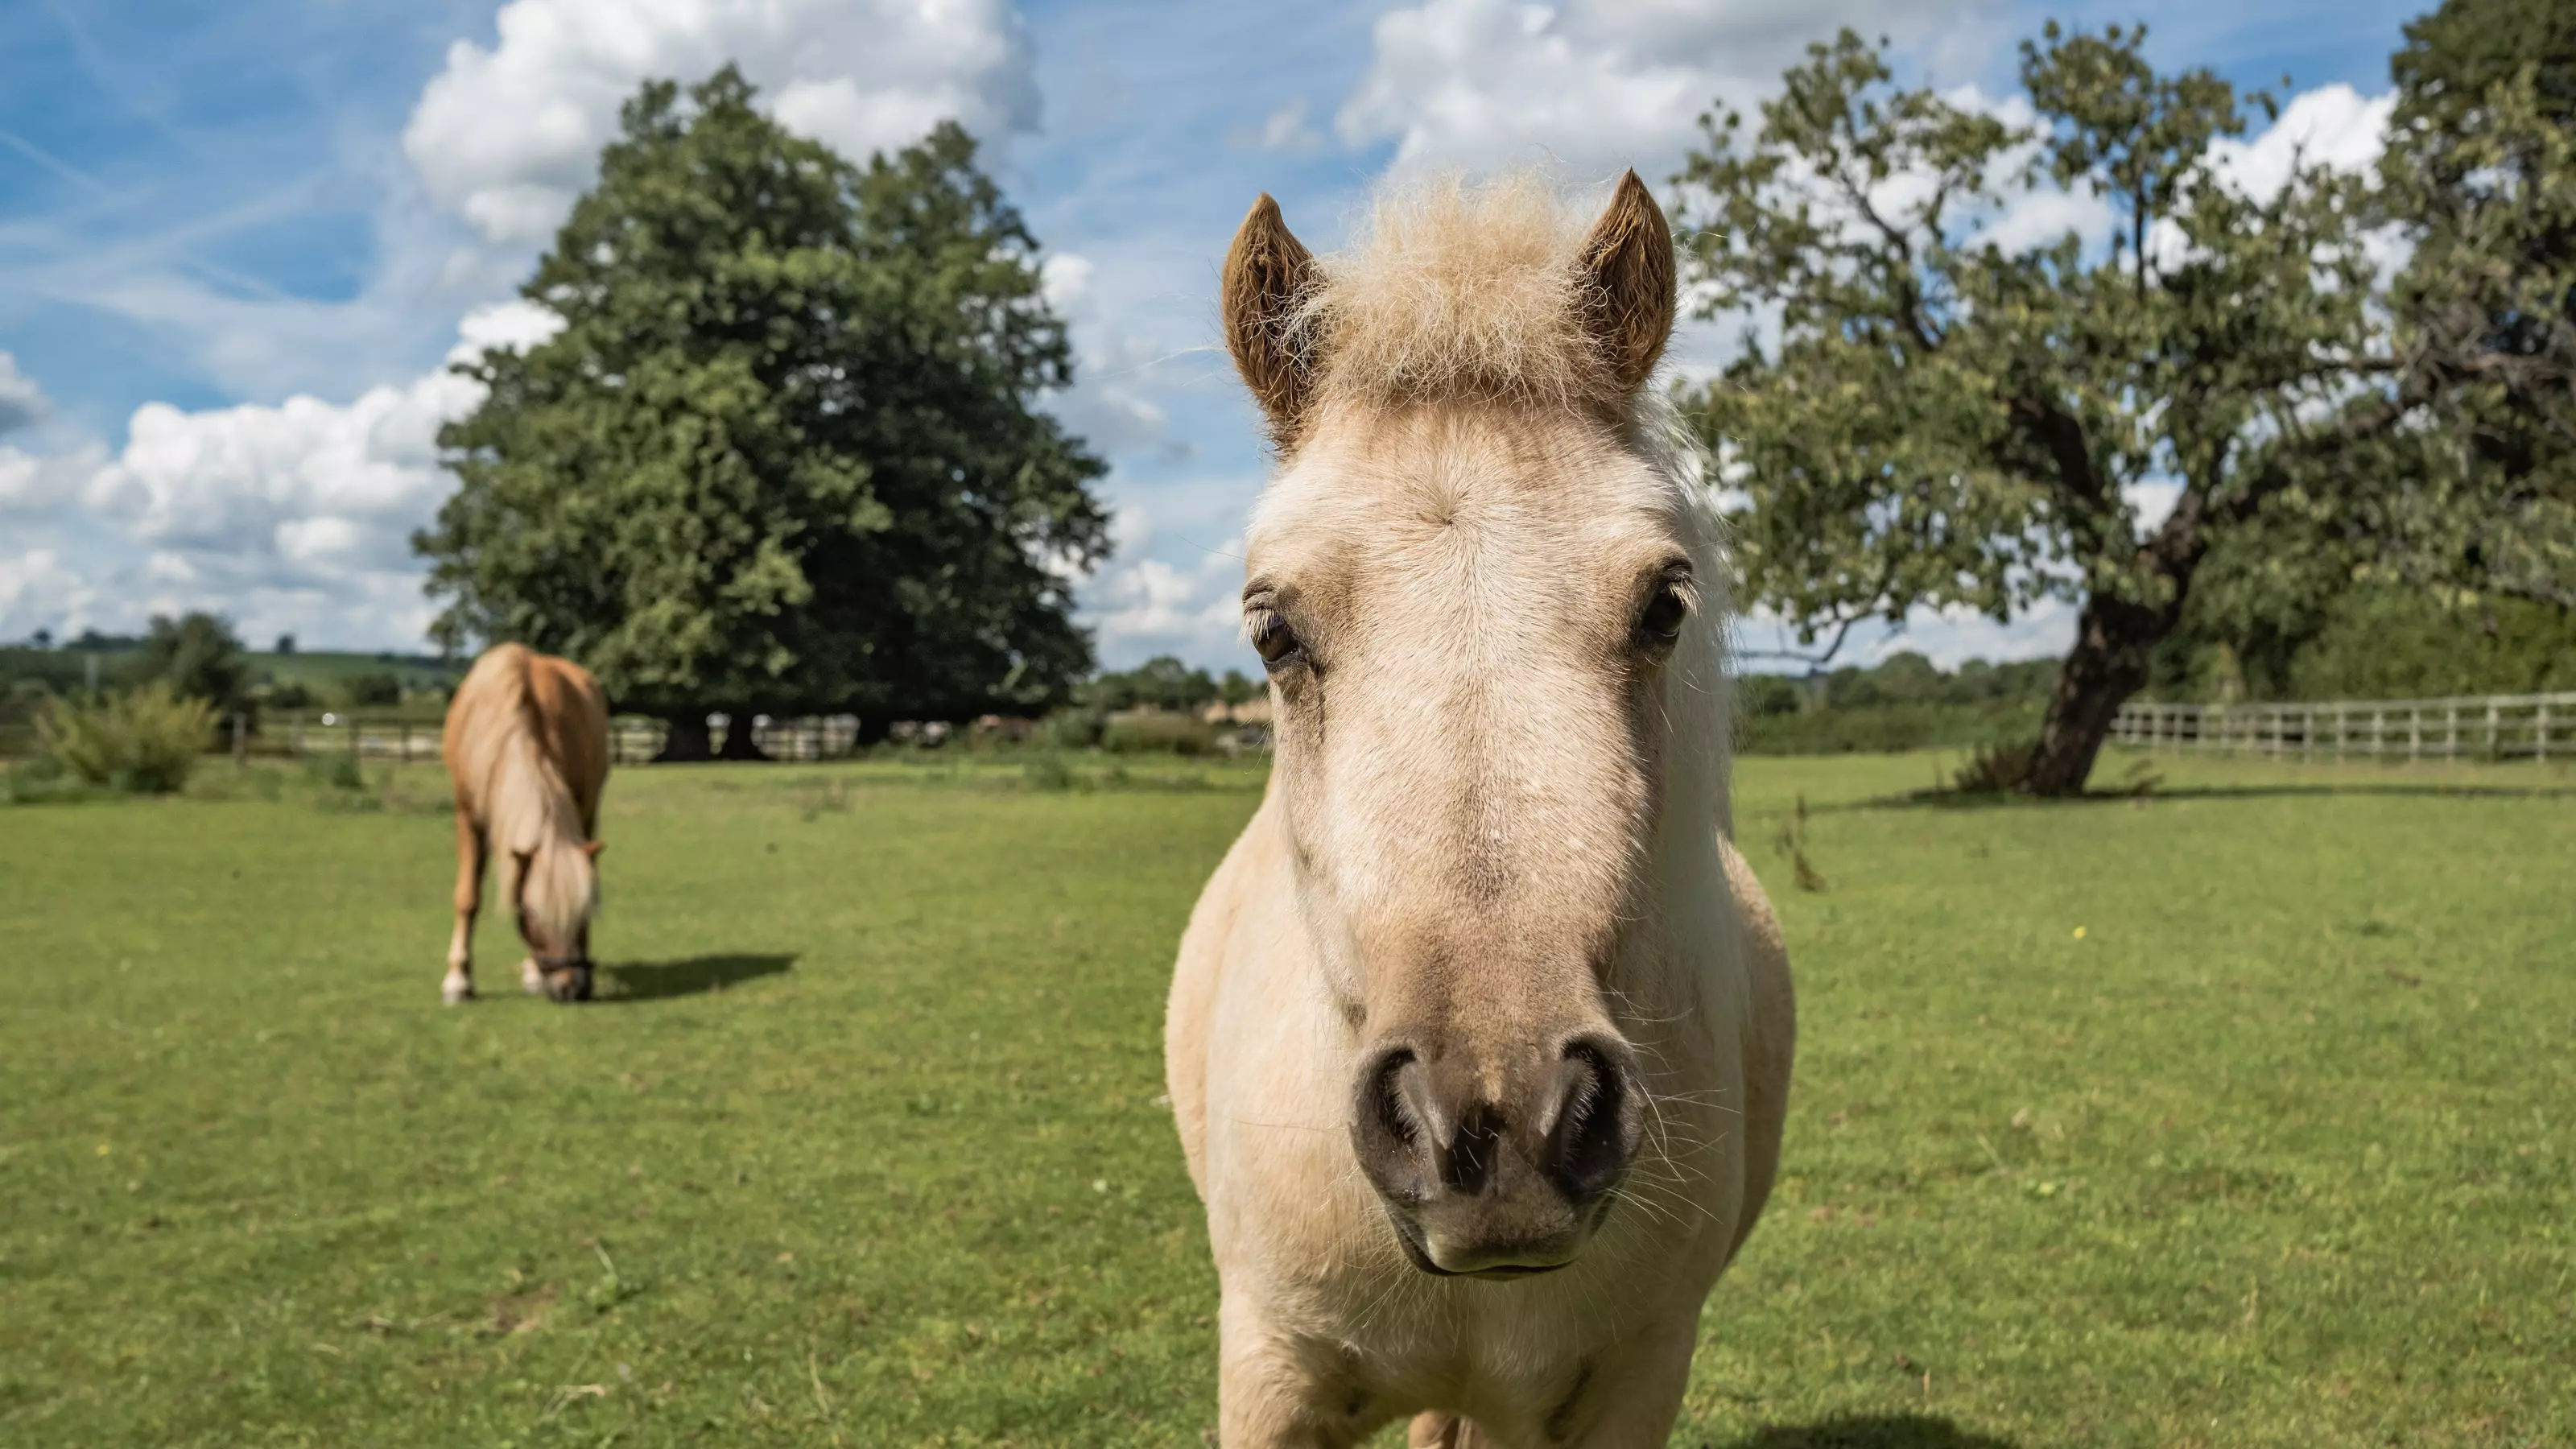 Ears forward and staring into the camera, Megan the golden palomino Shetland pony stands in a field full of green grass